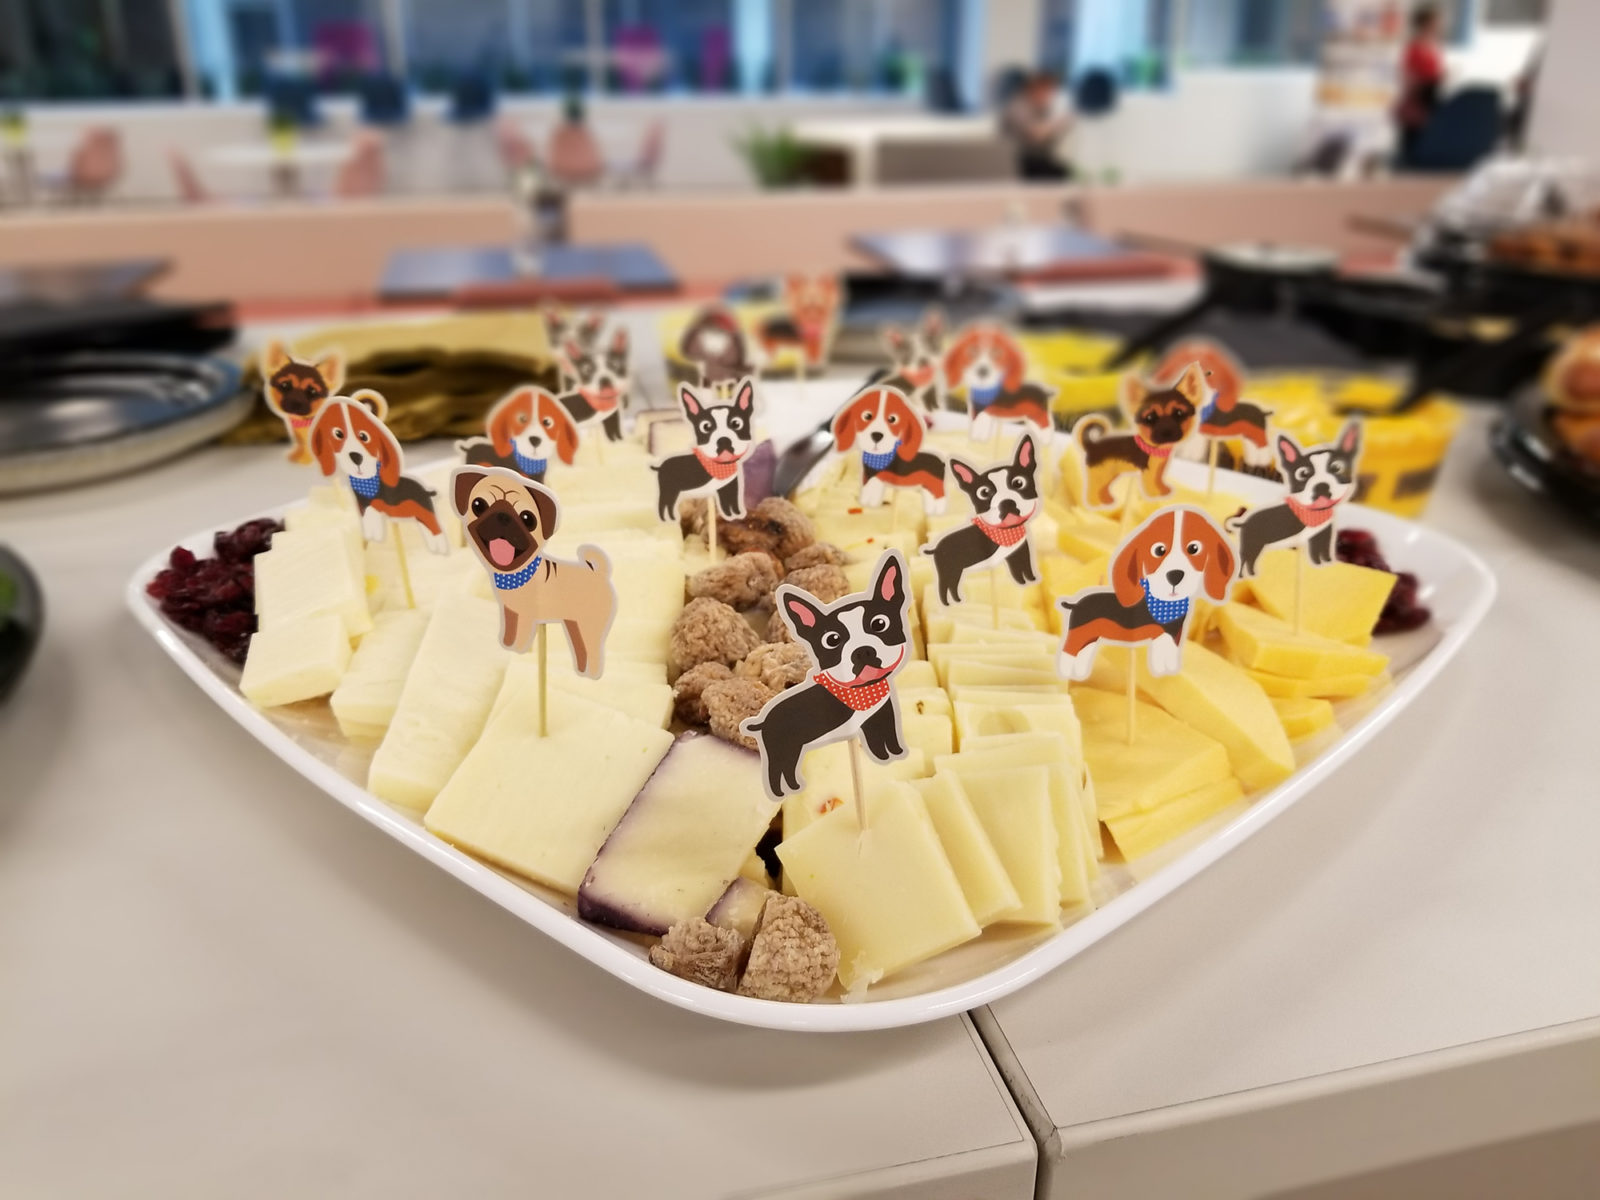 Close up image of a cheese tray with dog-themed toothpicks.